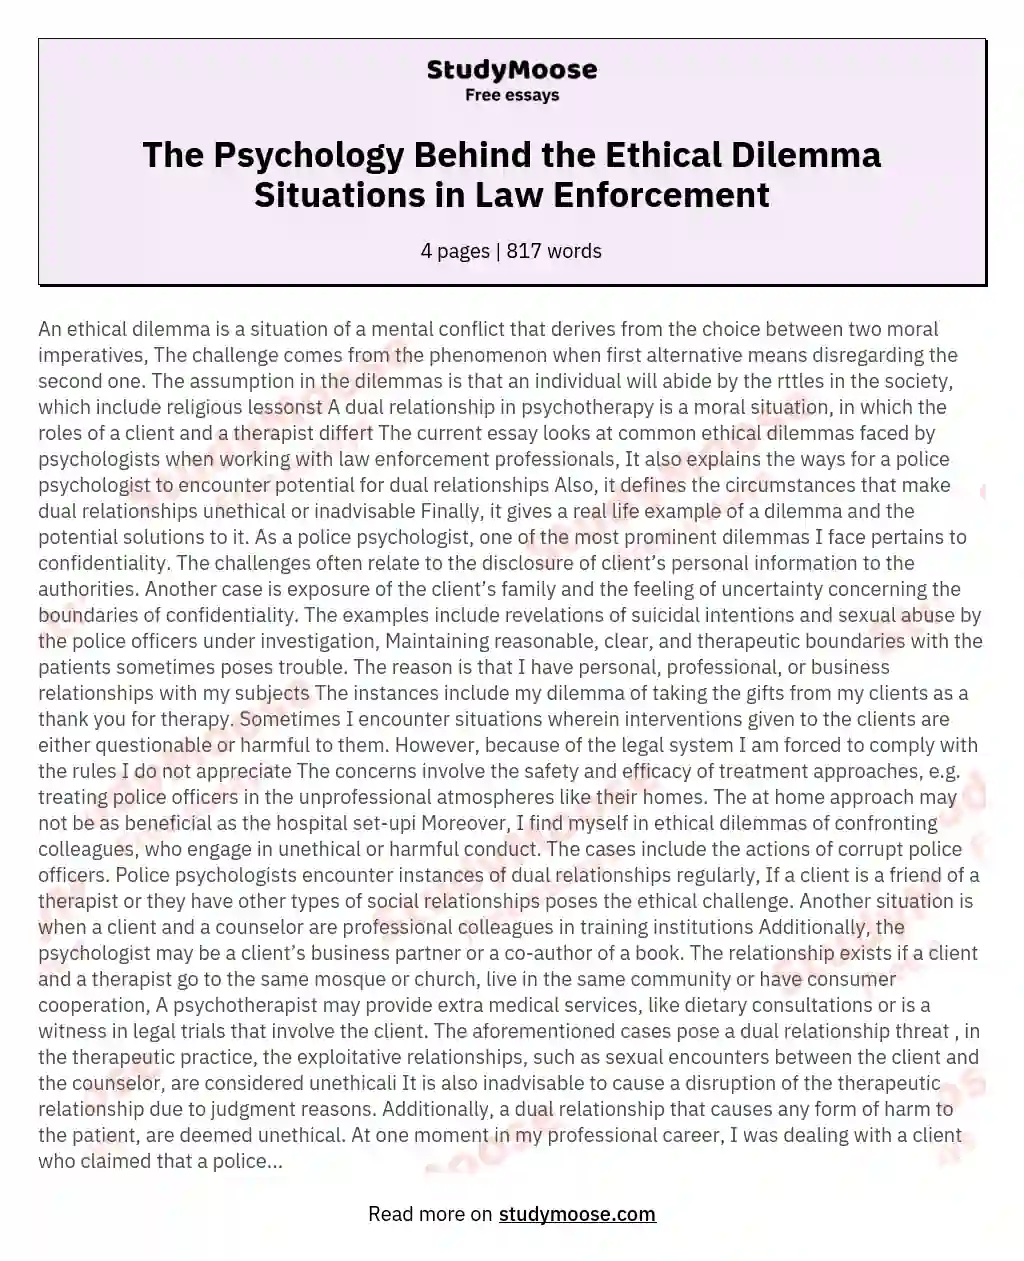 The Psychology Behind the Ethical Dilemma Situations in Law Enforcement essay